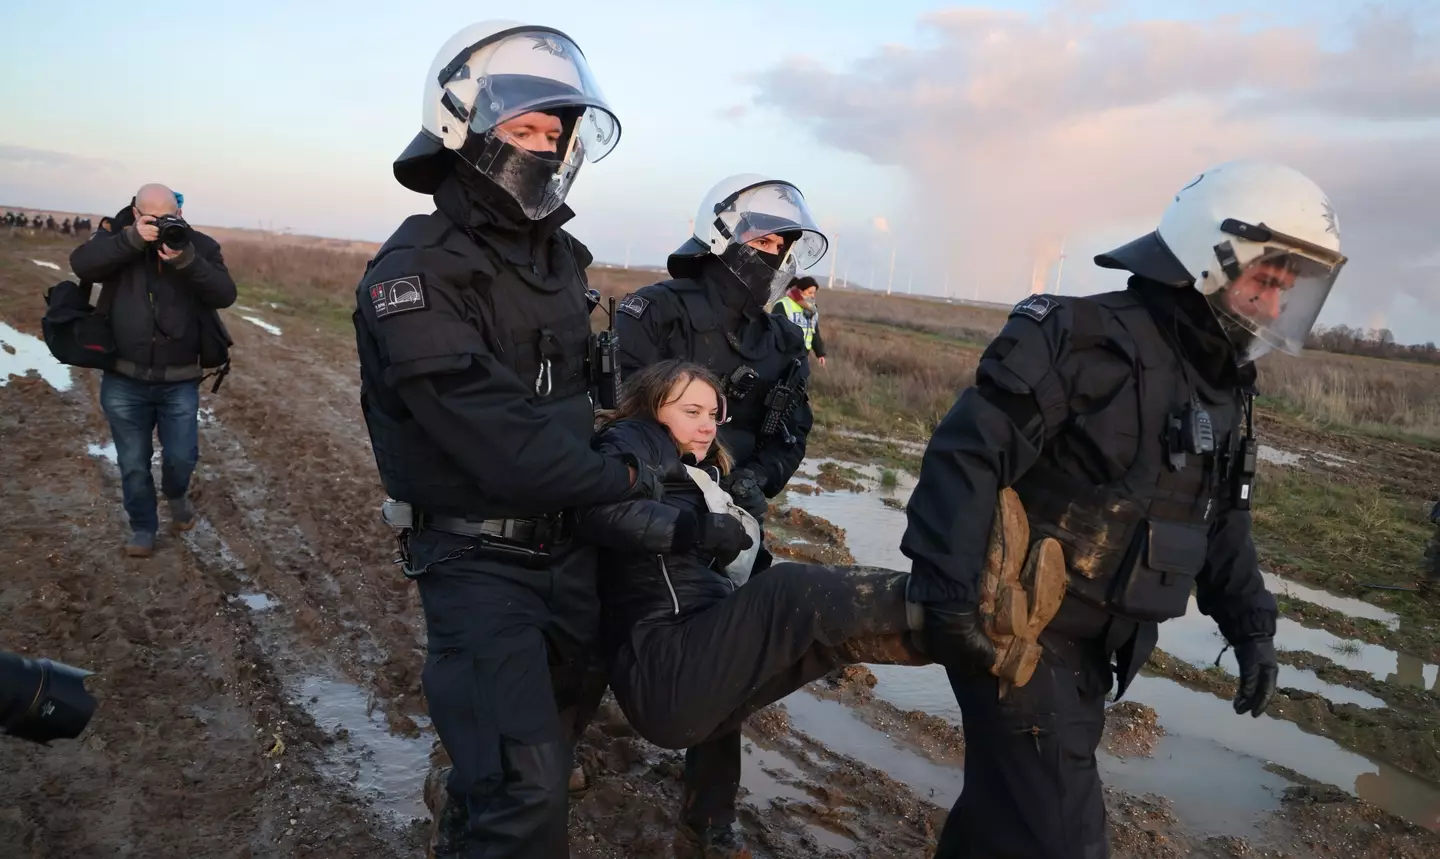 The young climate activist was detained by police.